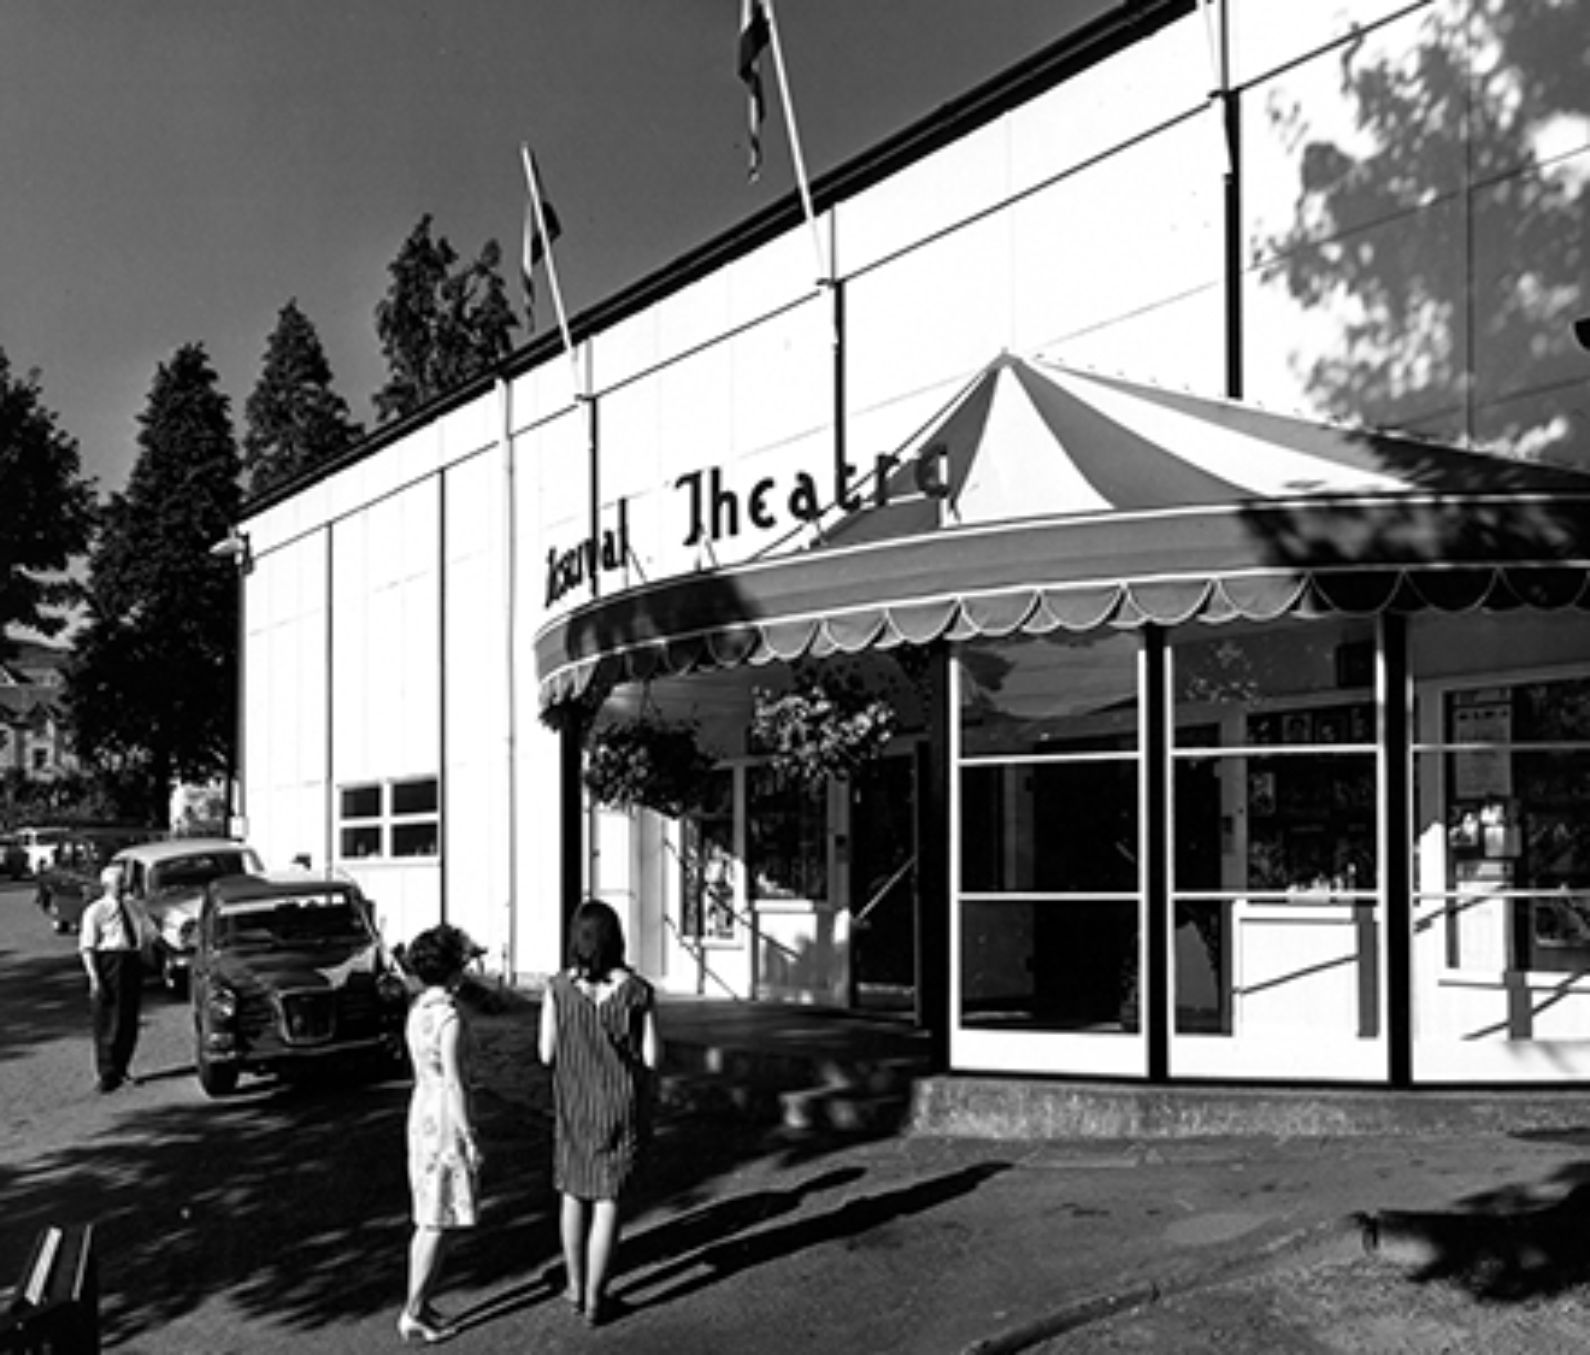 Black and white image of the entrance to the theatre with a canopy over the doors and the words 'Festival Theatre' written above, three people are approaching the door with two cars parked nearby. Flags have been arranged on poles above the canopy and stretch the guttering of the building